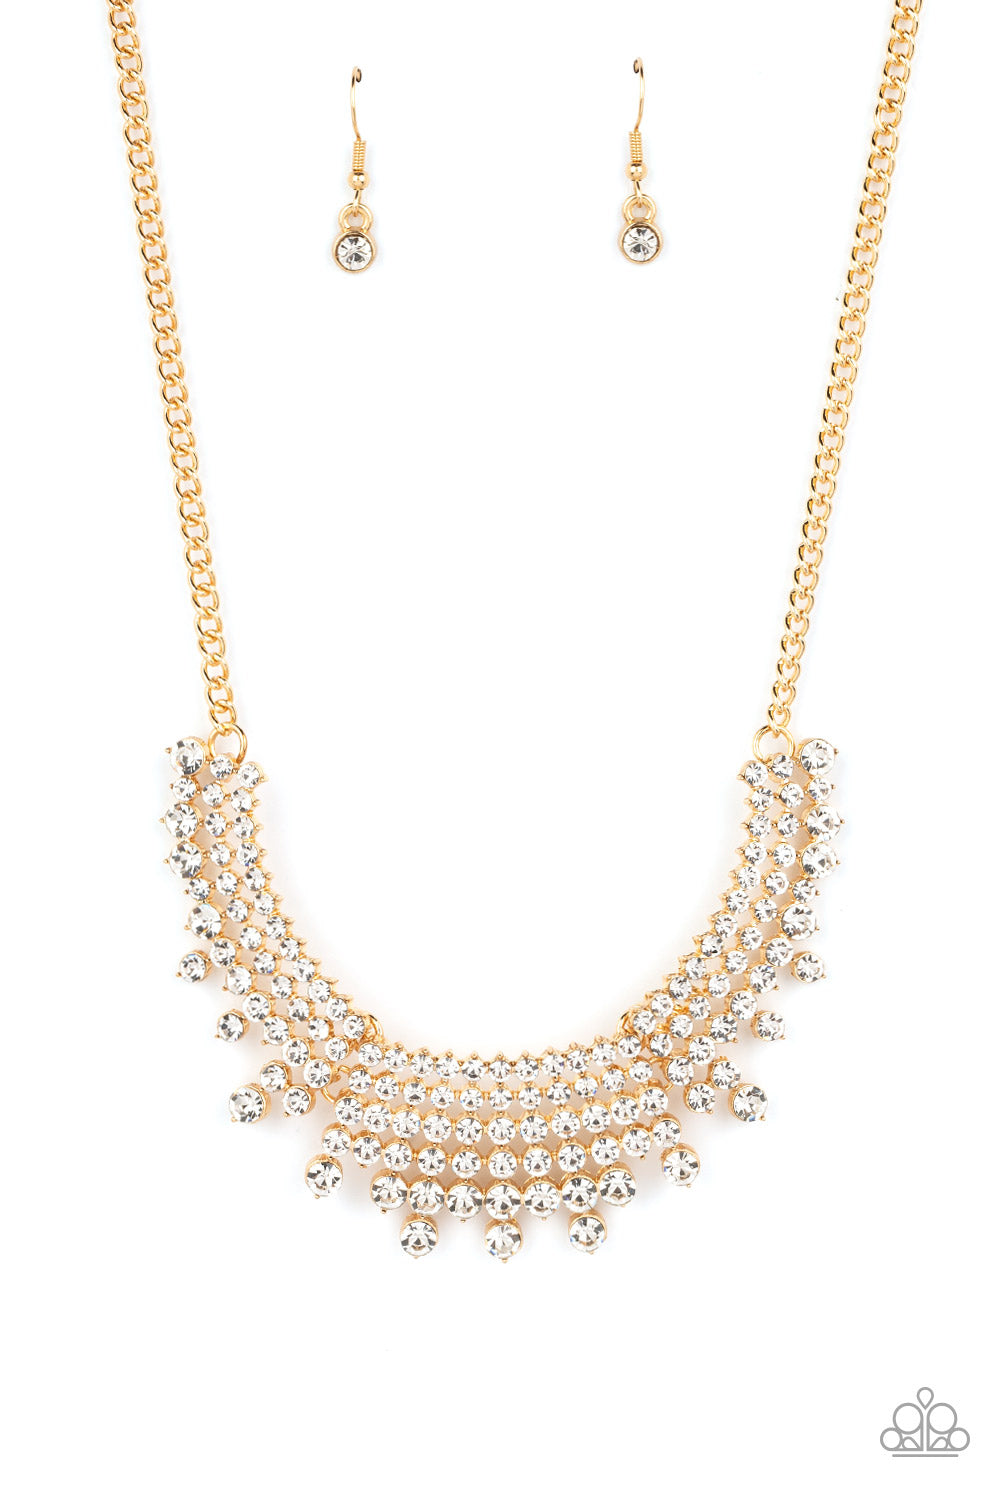 Shimmering Song - Gold Necklace Set January 2023 Life of the Party Exclusive - Princess Glam Shop